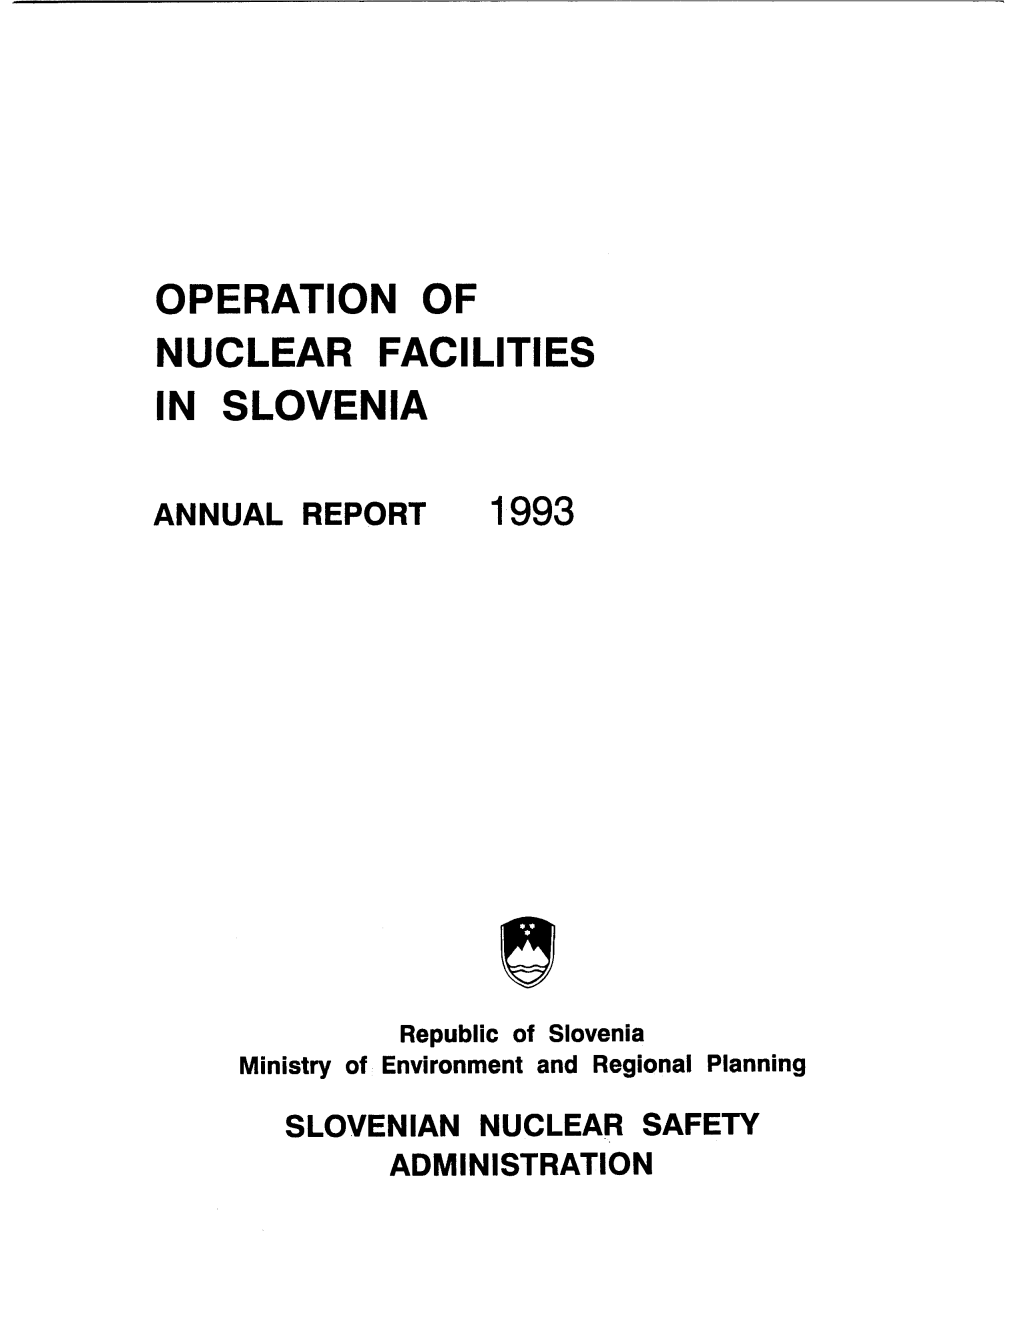 Krsko Nuclear Power Plant 18 Unplanned Outage of the Krsko Nuclear Pover Plant 19 Triga Research Reactor